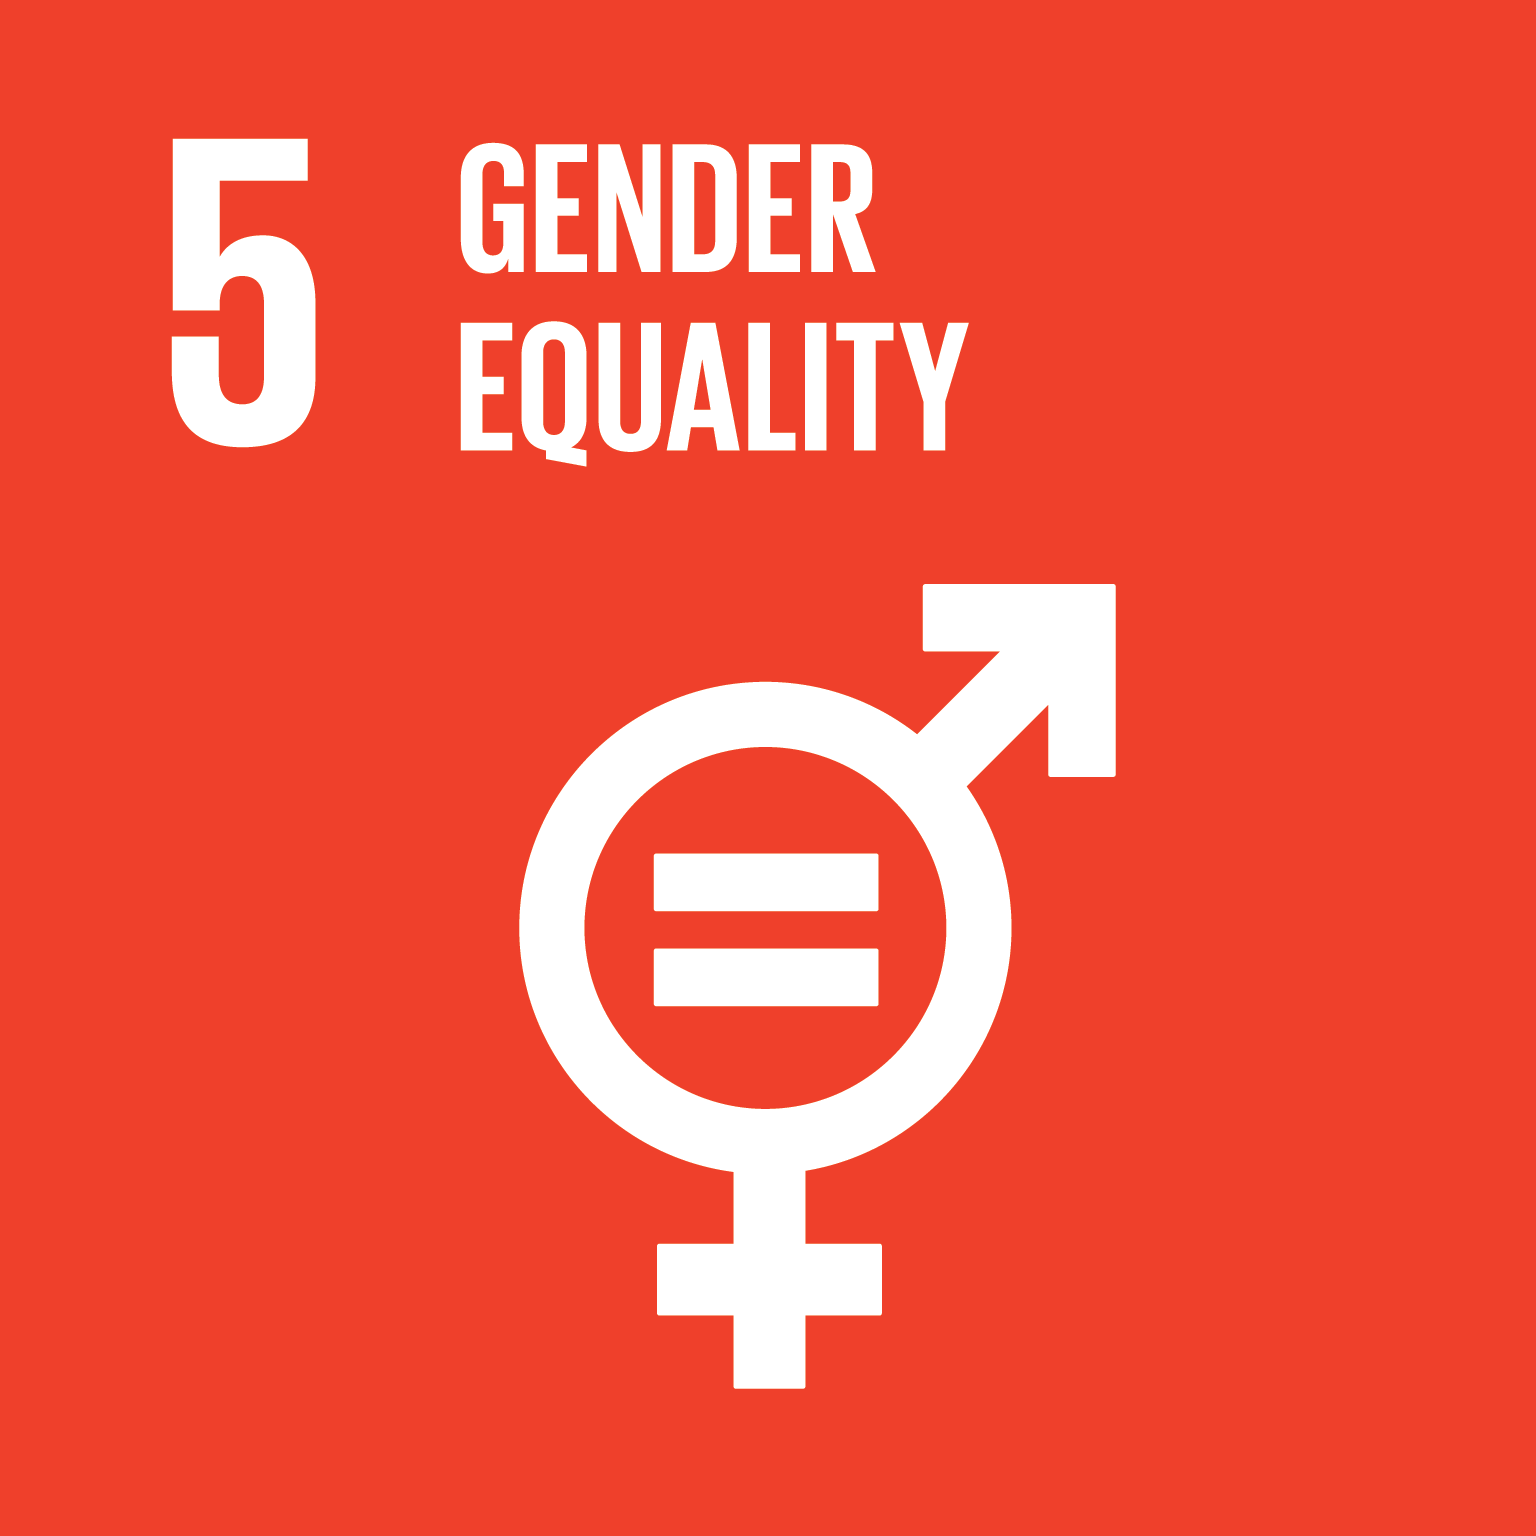 Goal 5: Gender Equality - Achieve gender equality and empower all women and girls